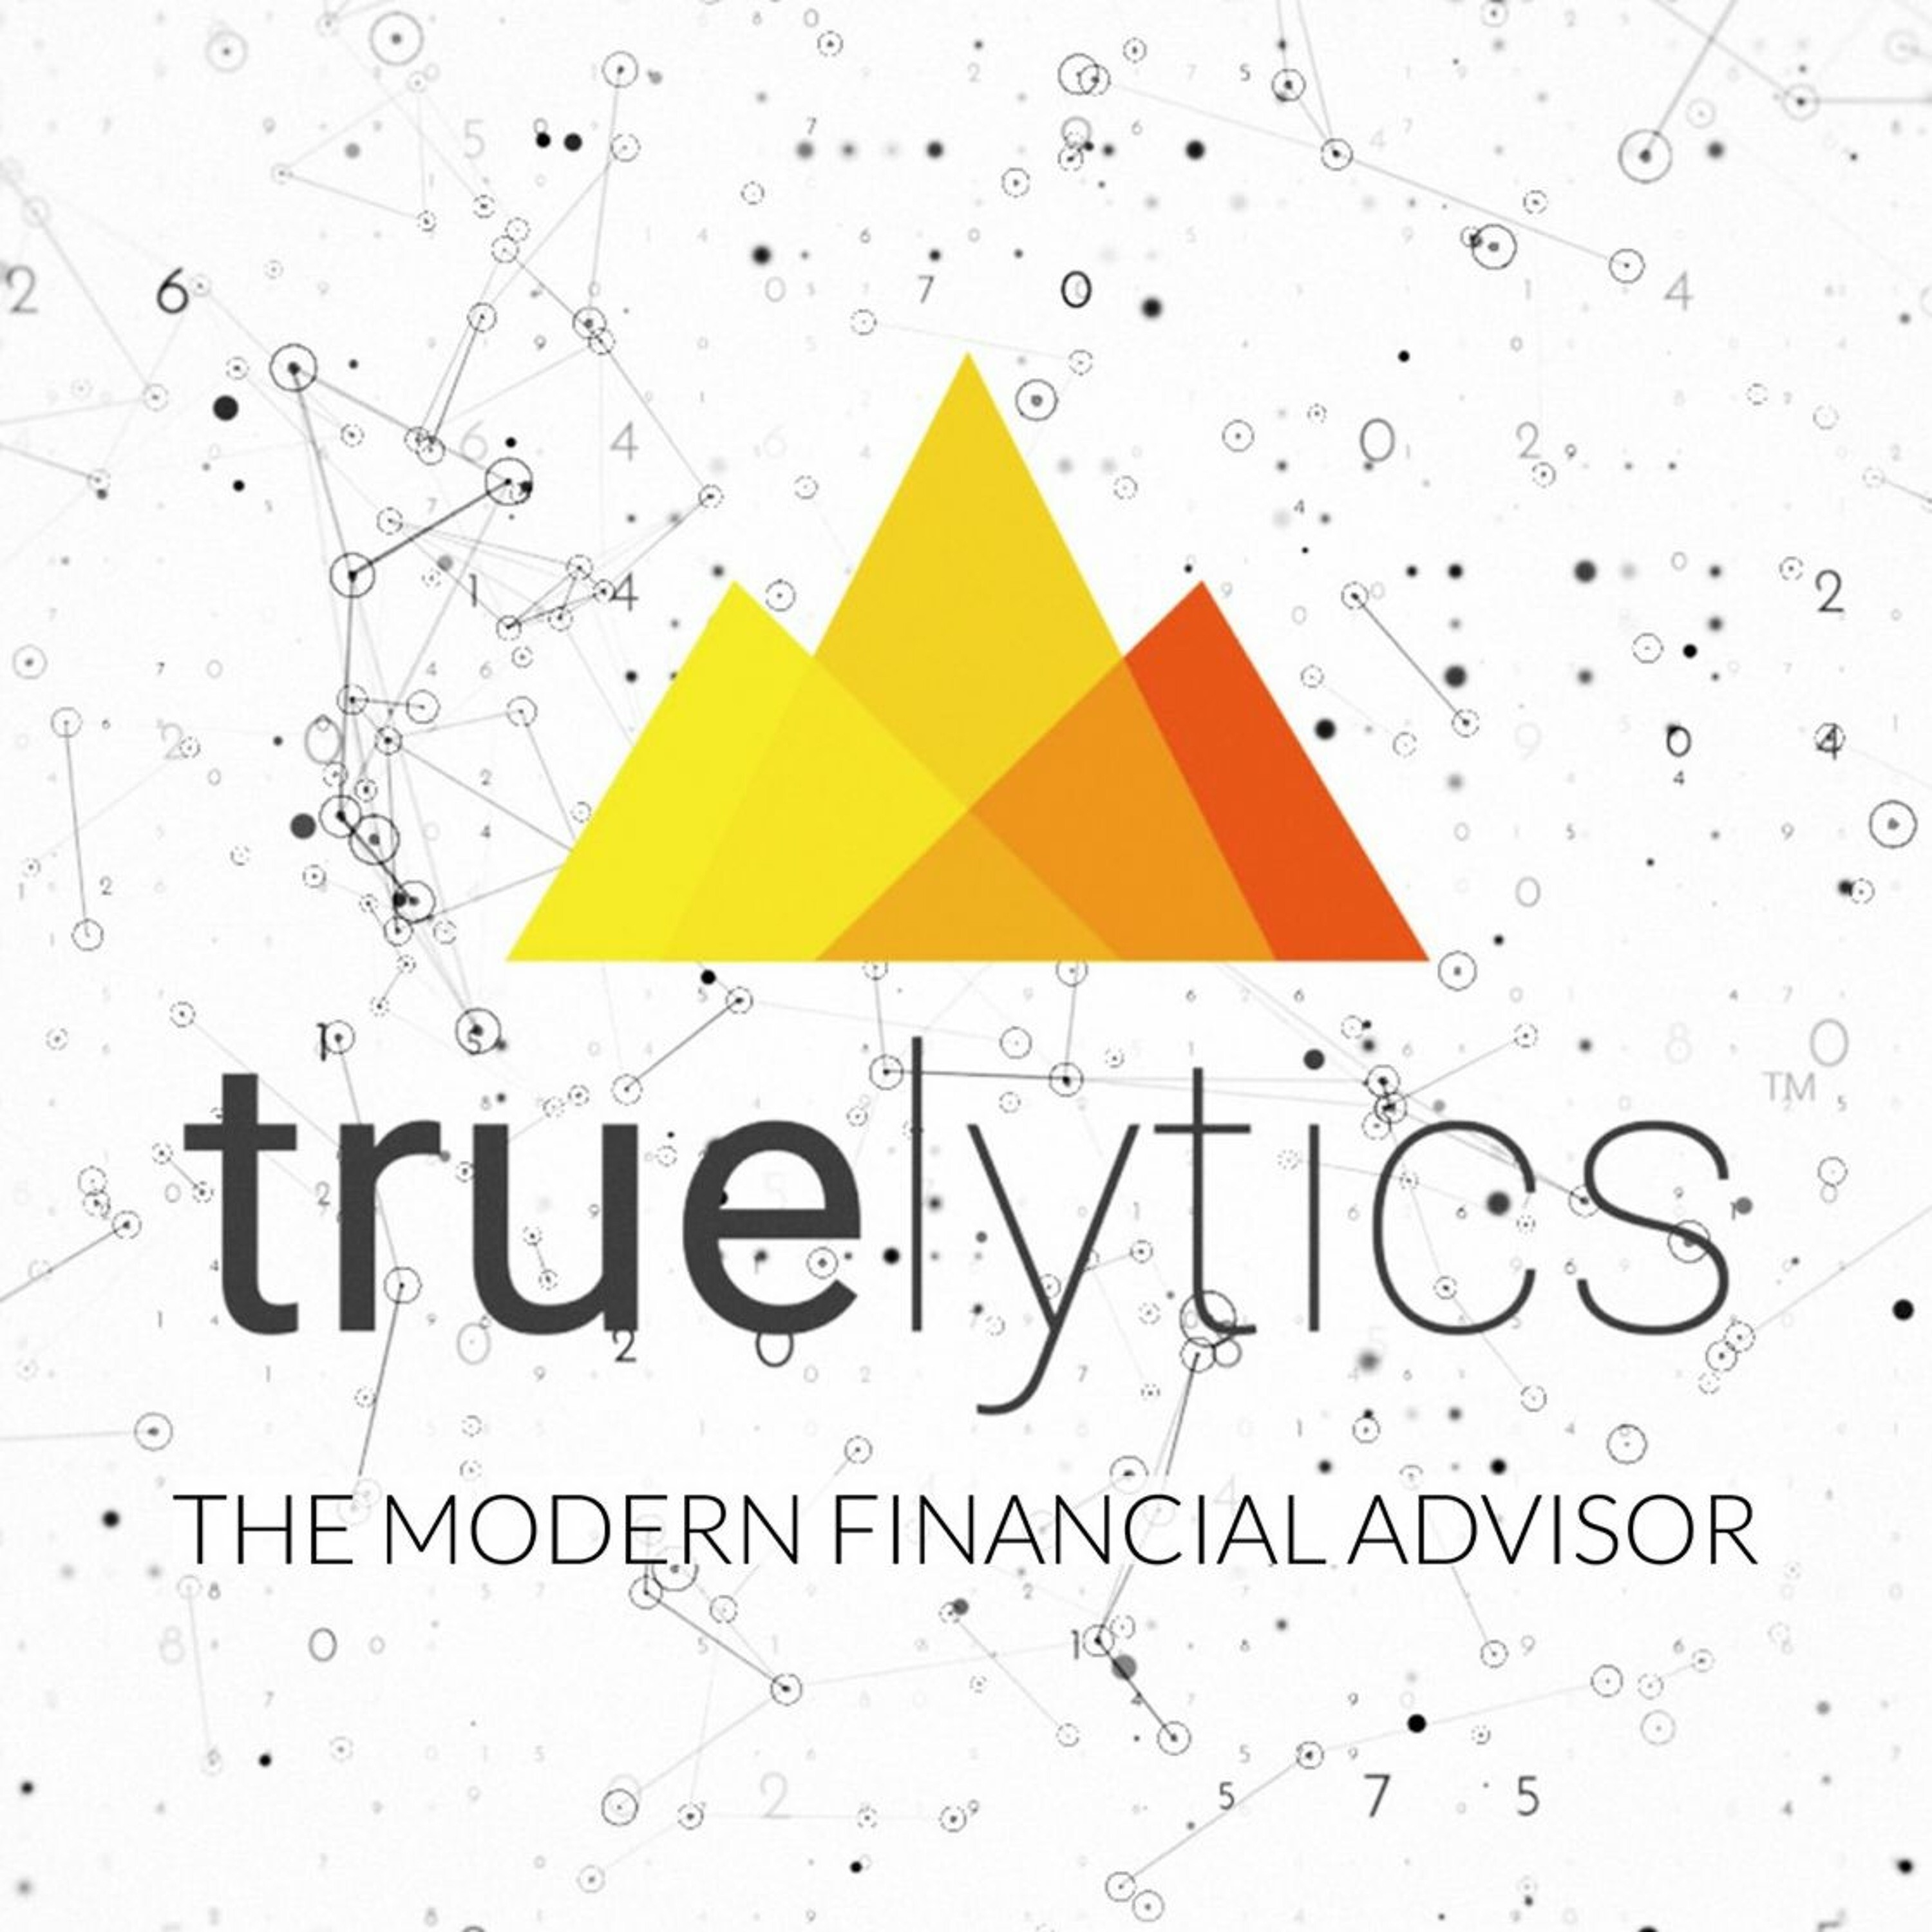 Episode 45 - How Financial Advisors and RIAs Can Use Storytelling in the M&A Process